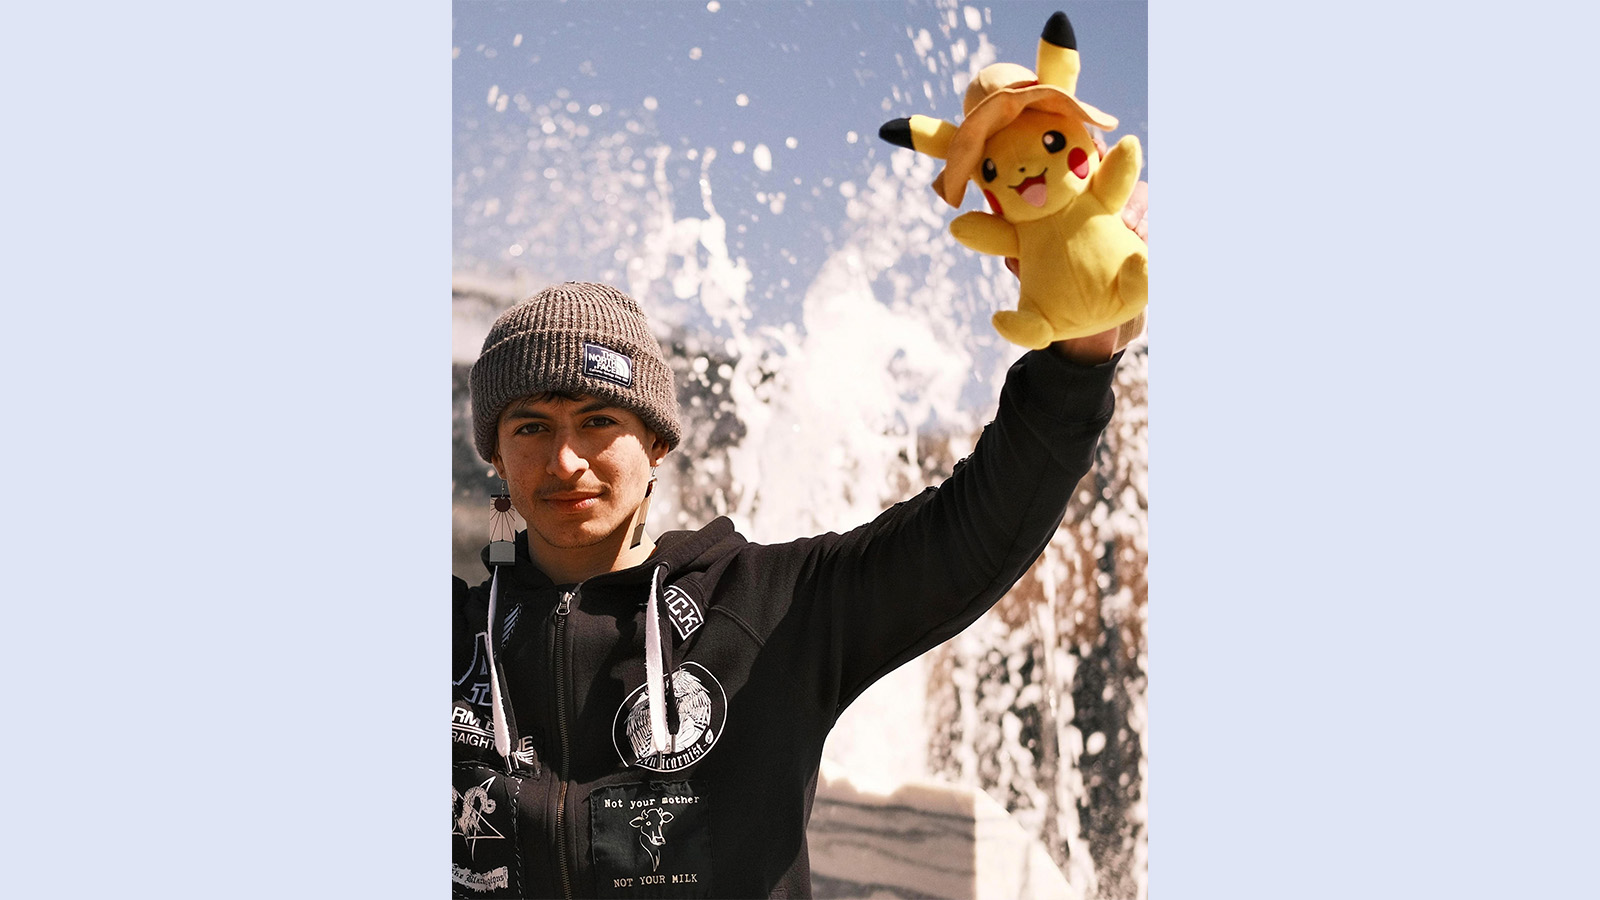 Photo of Ariel Parada in front of water fountain holding Pikachu plushie